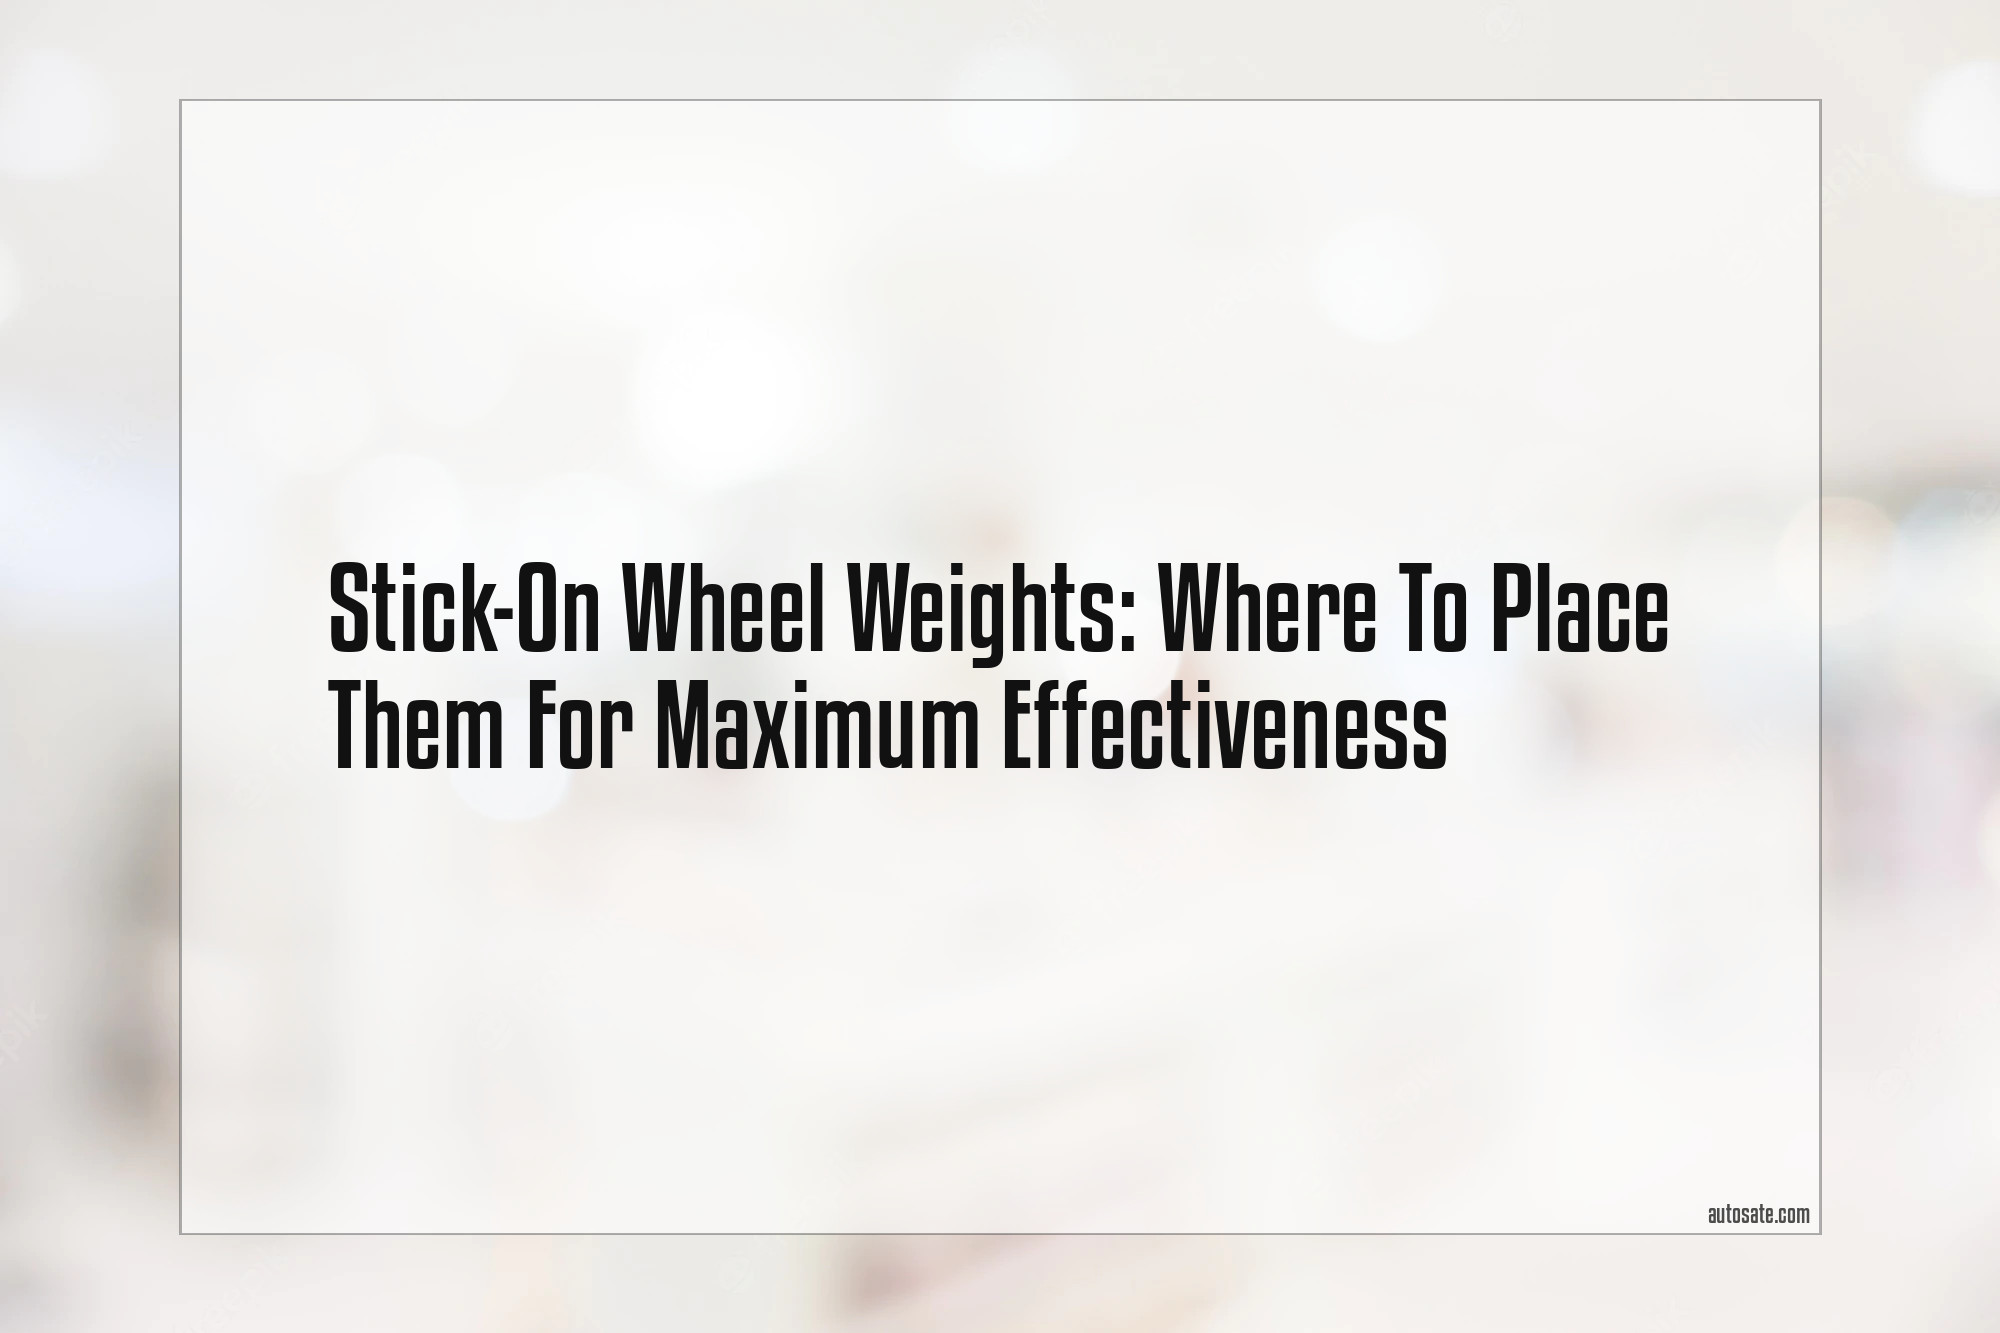 Stick-On Wheel Weights: Where To Place Them For Maximum Effectiveness